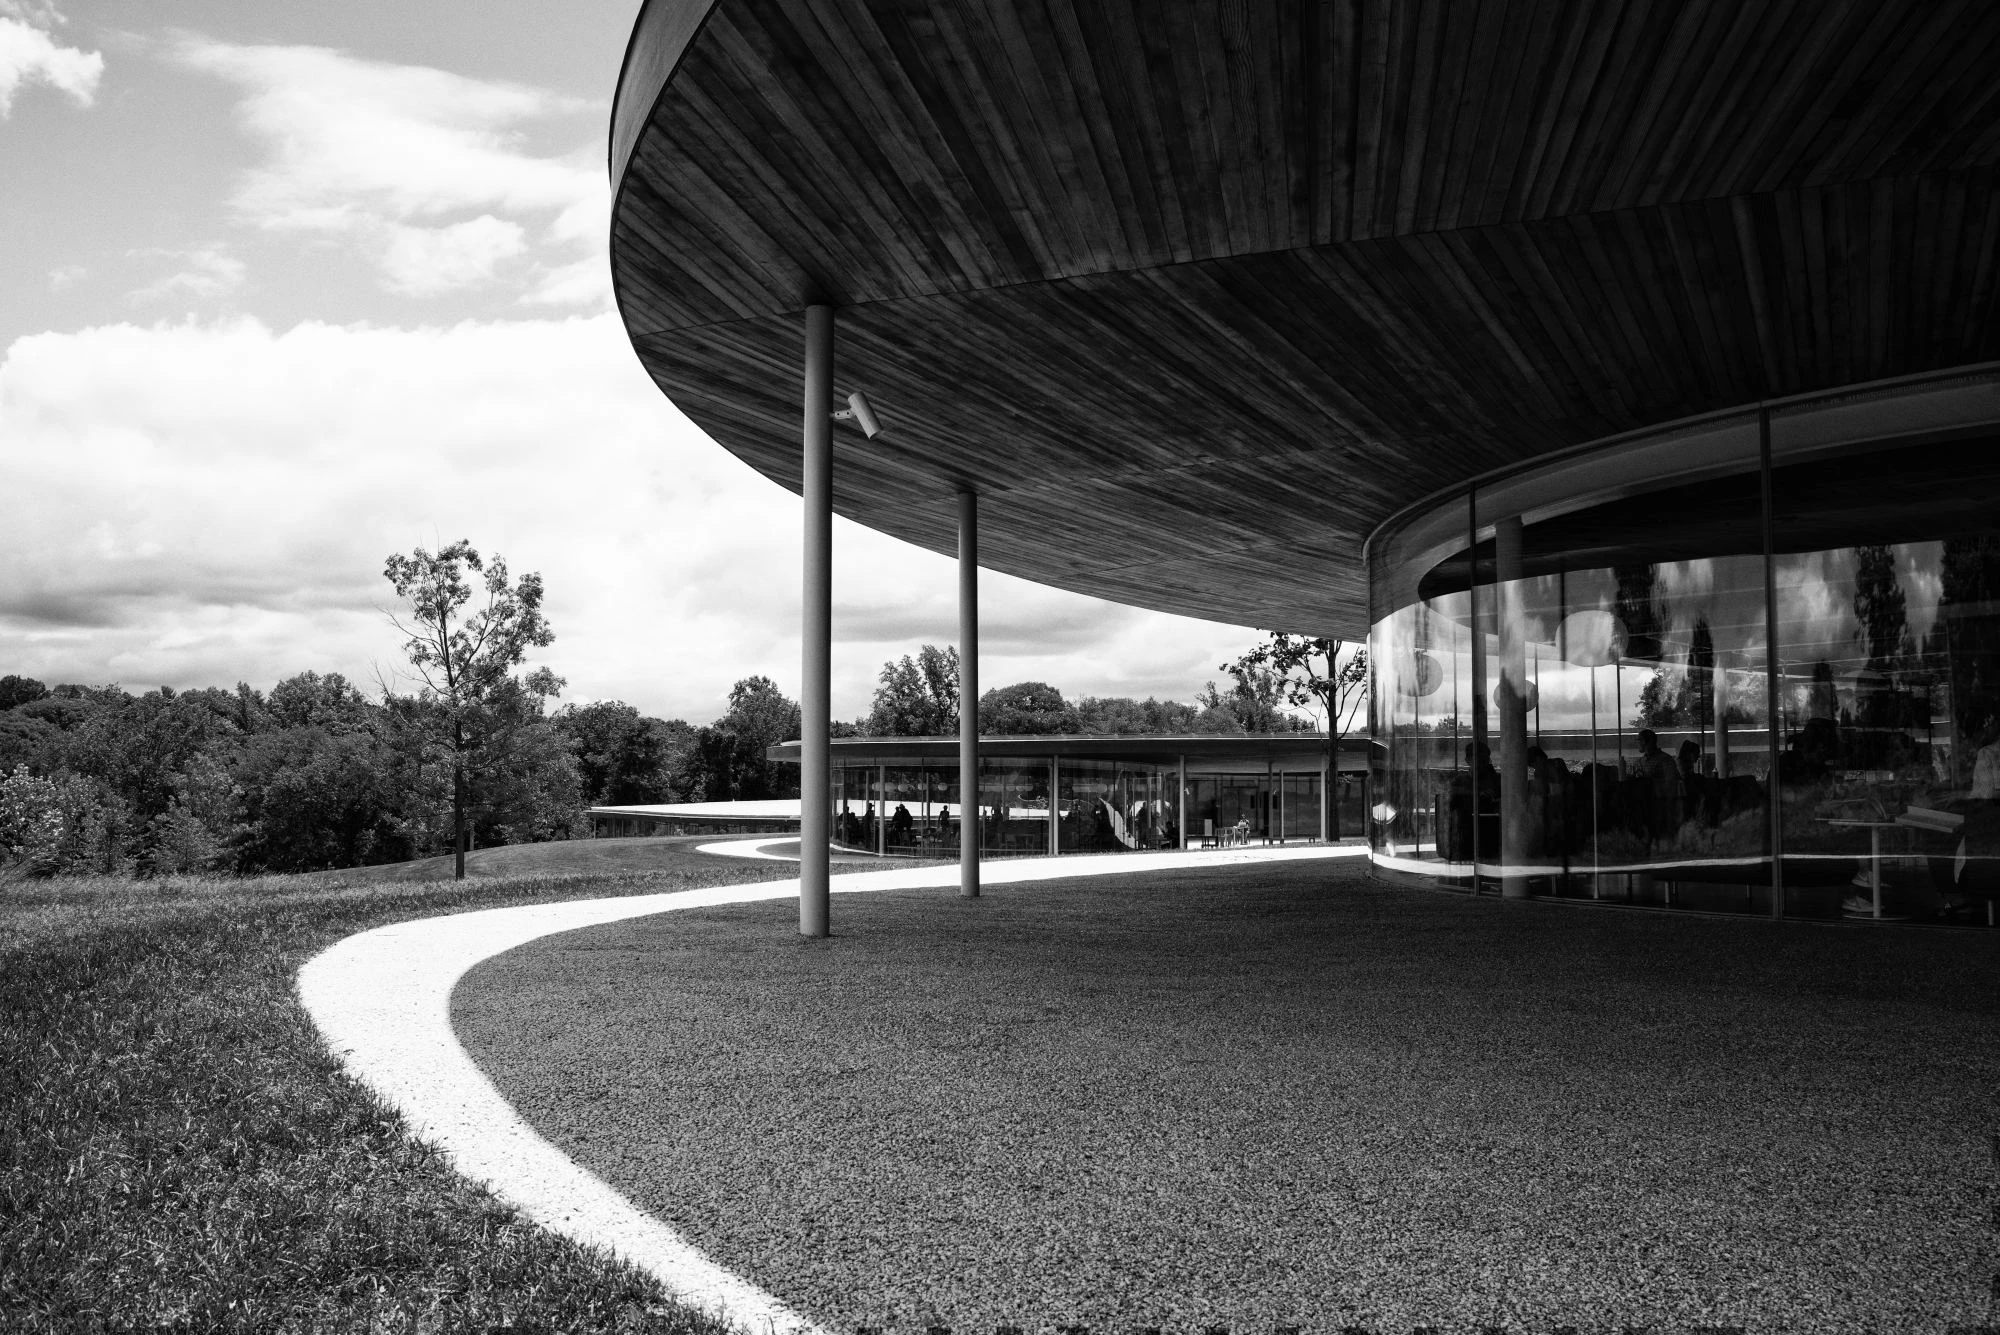 Greyscale picture of a park with a circular building and covered area. 